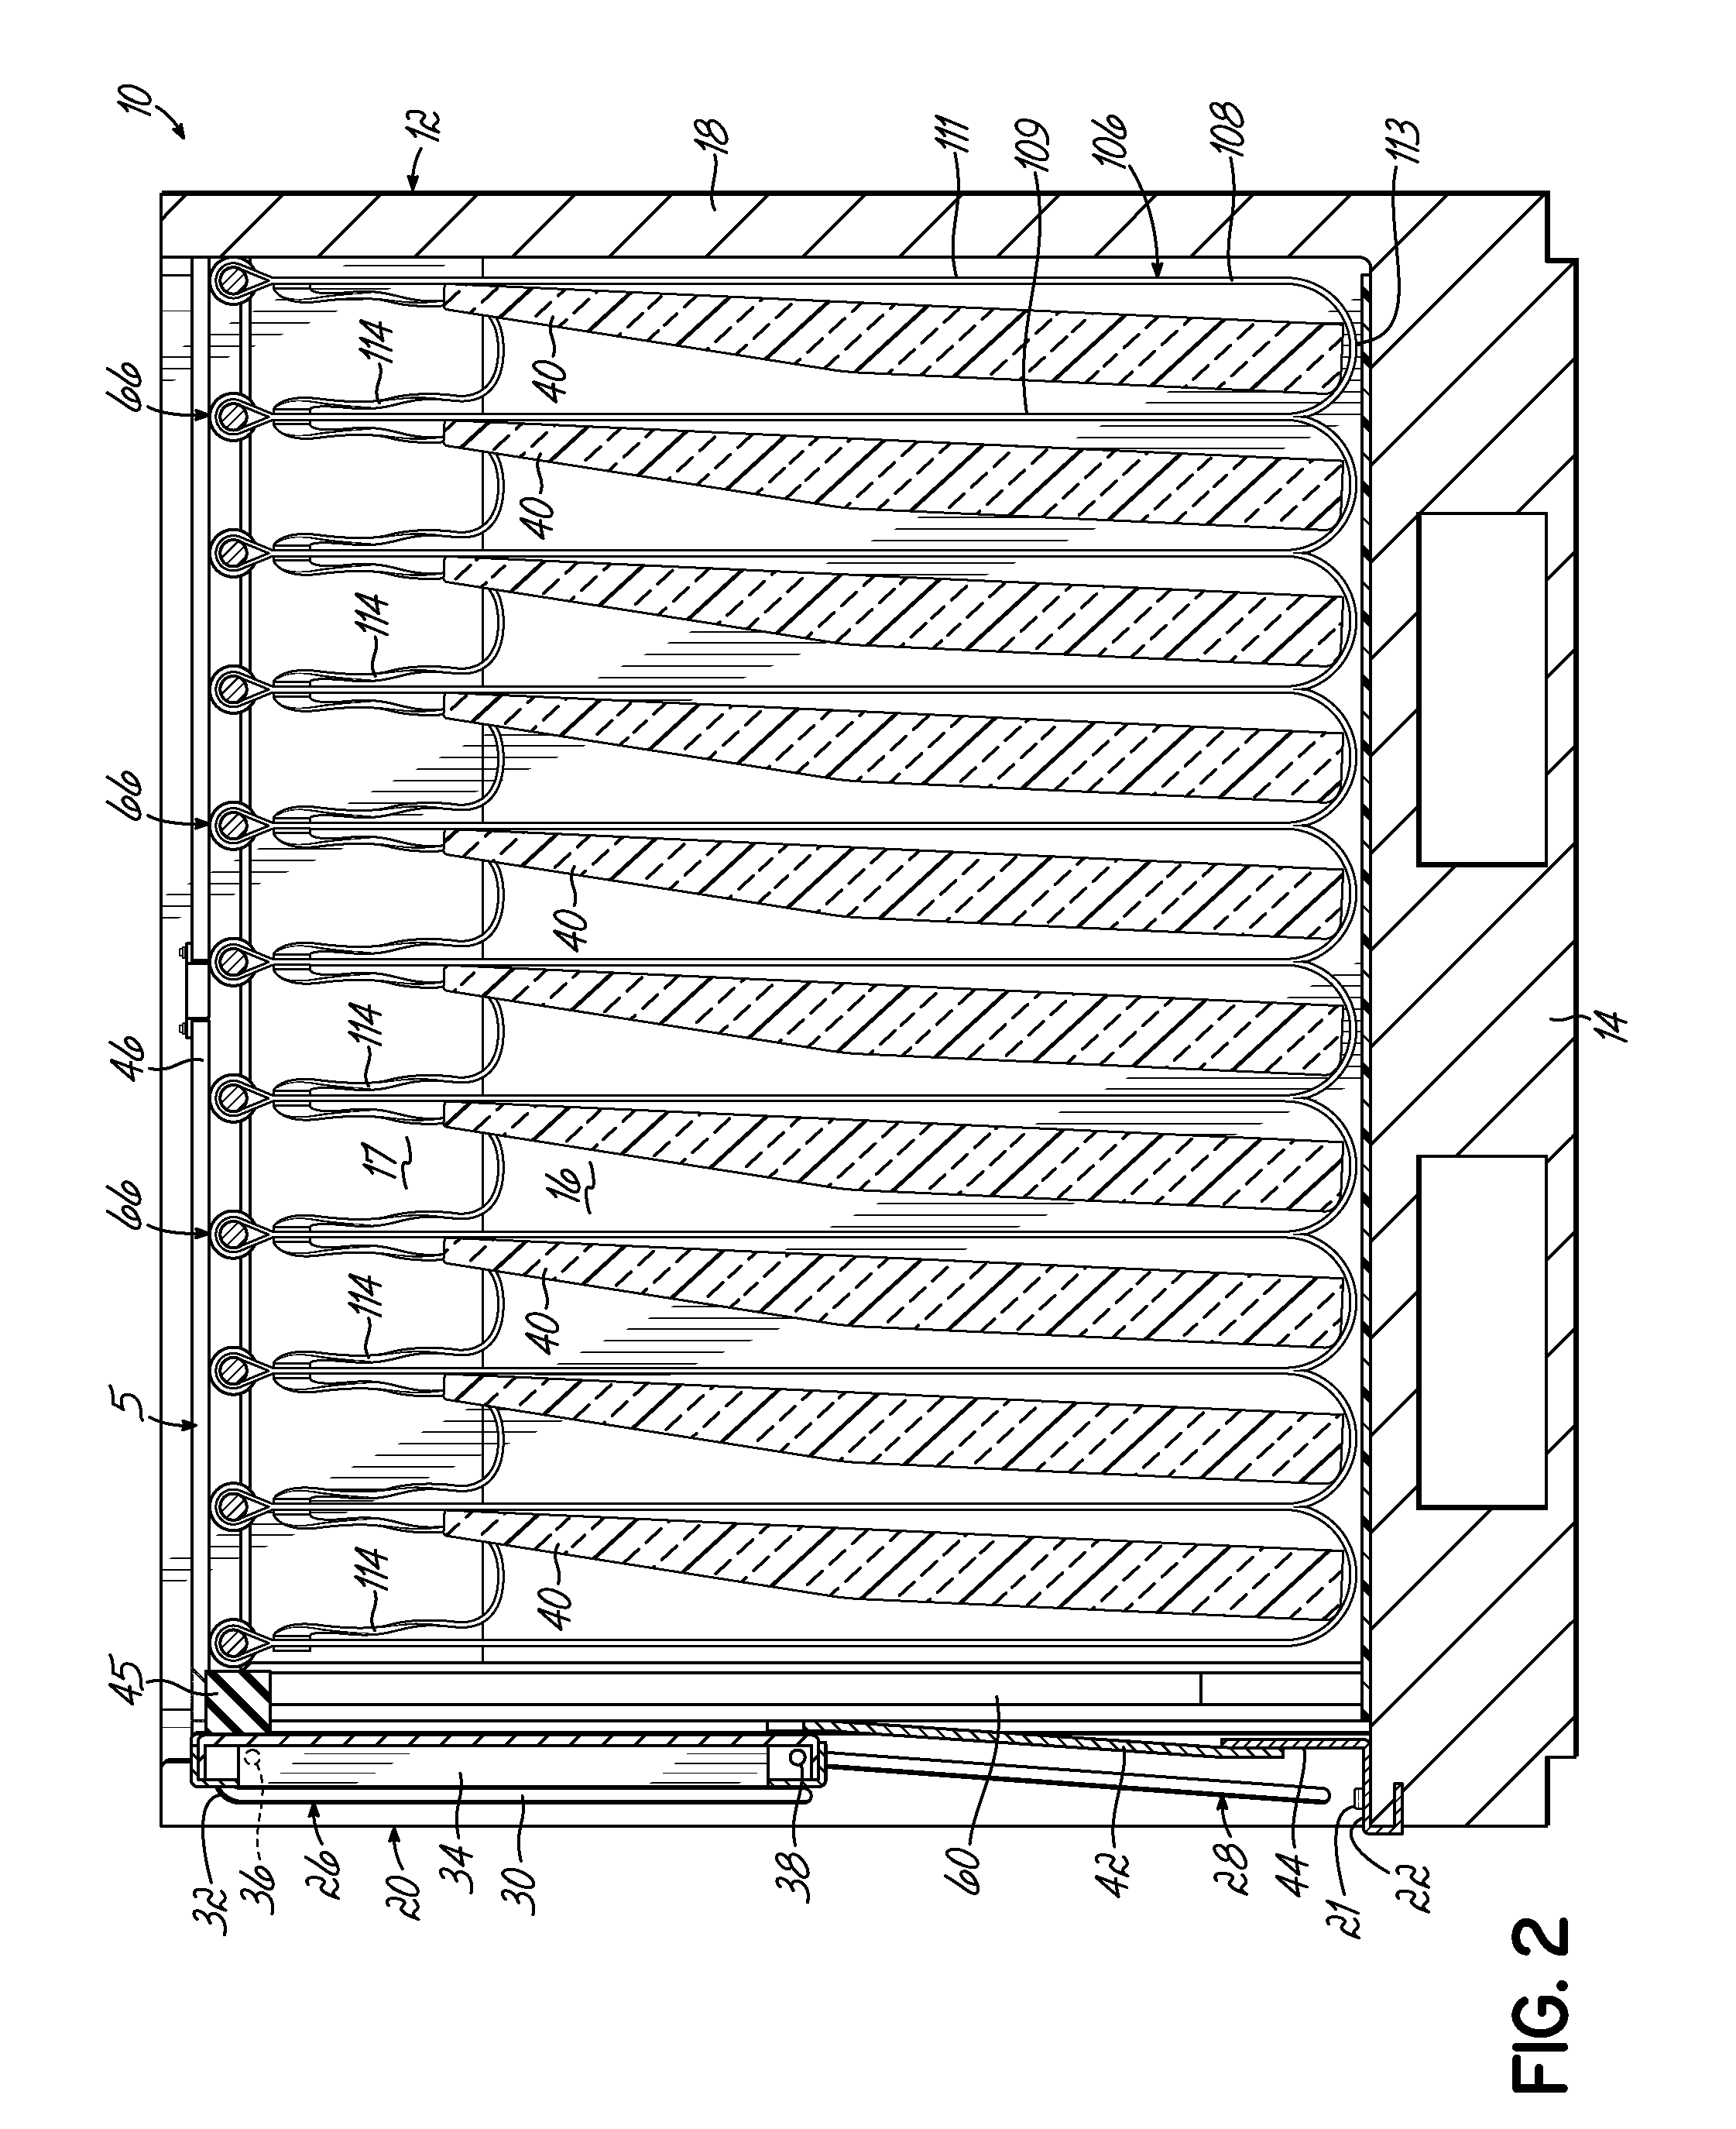 Container Having Metal Outer Frame For Supporting L-Shaped Tracks